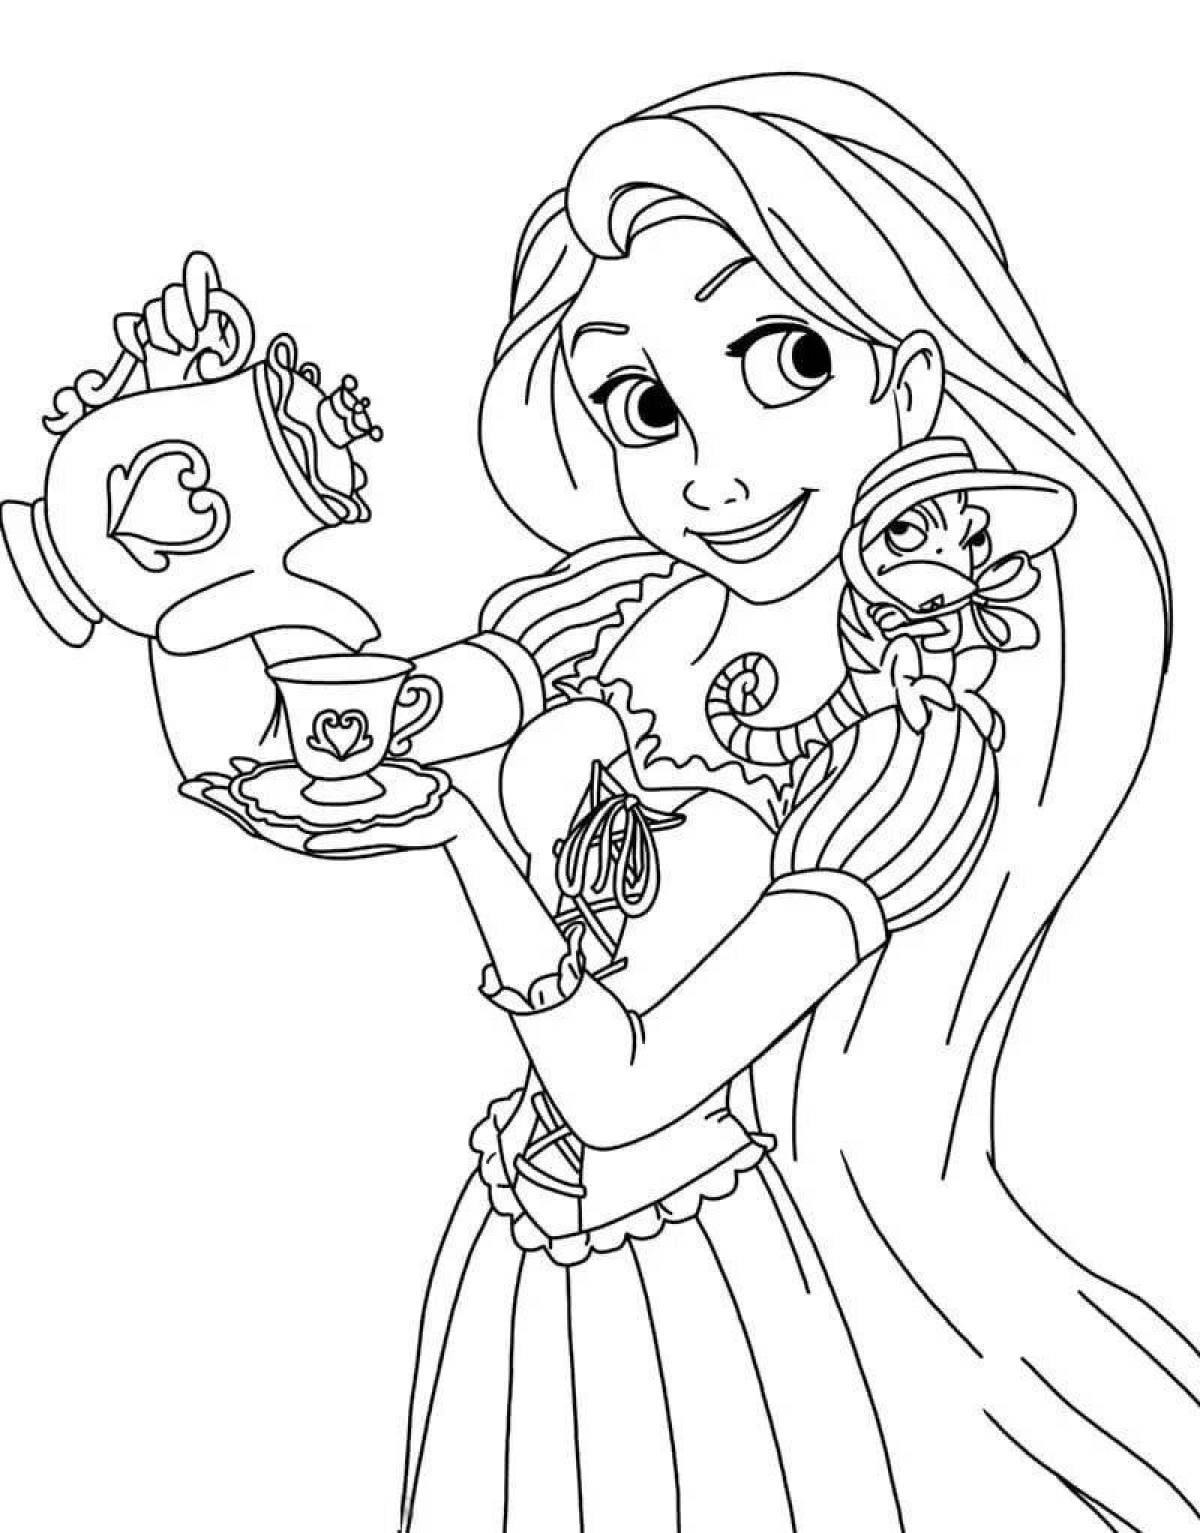 Serene princess coloring for girls 7 years old